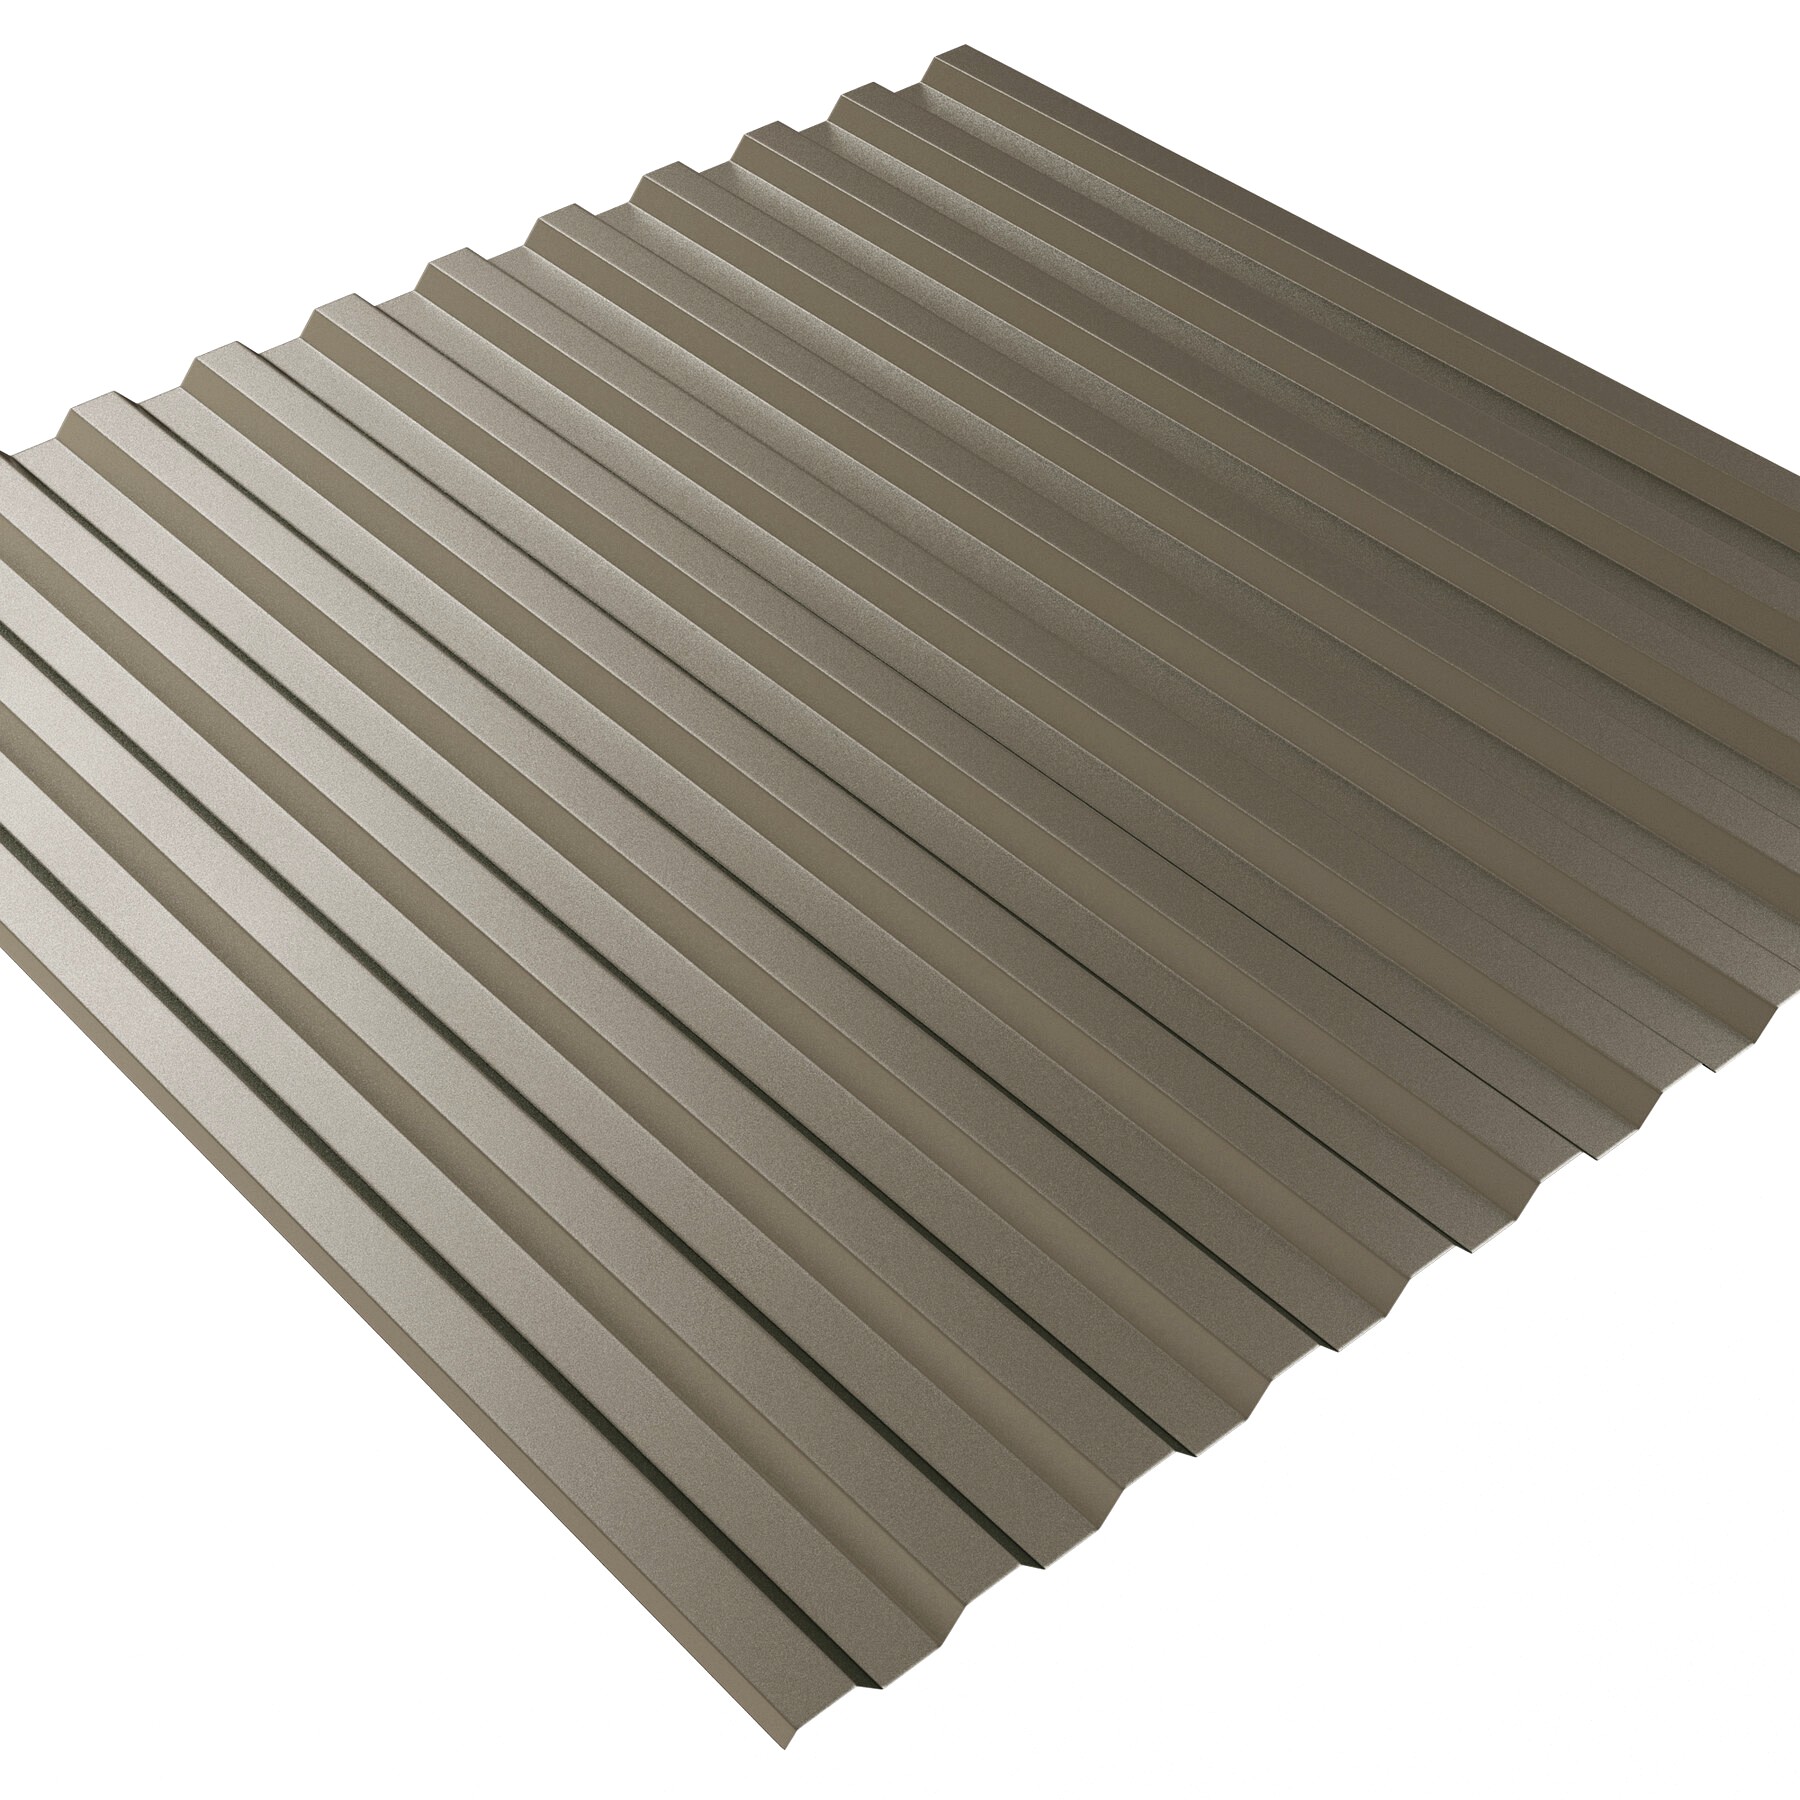 C21 Roofing Sheet